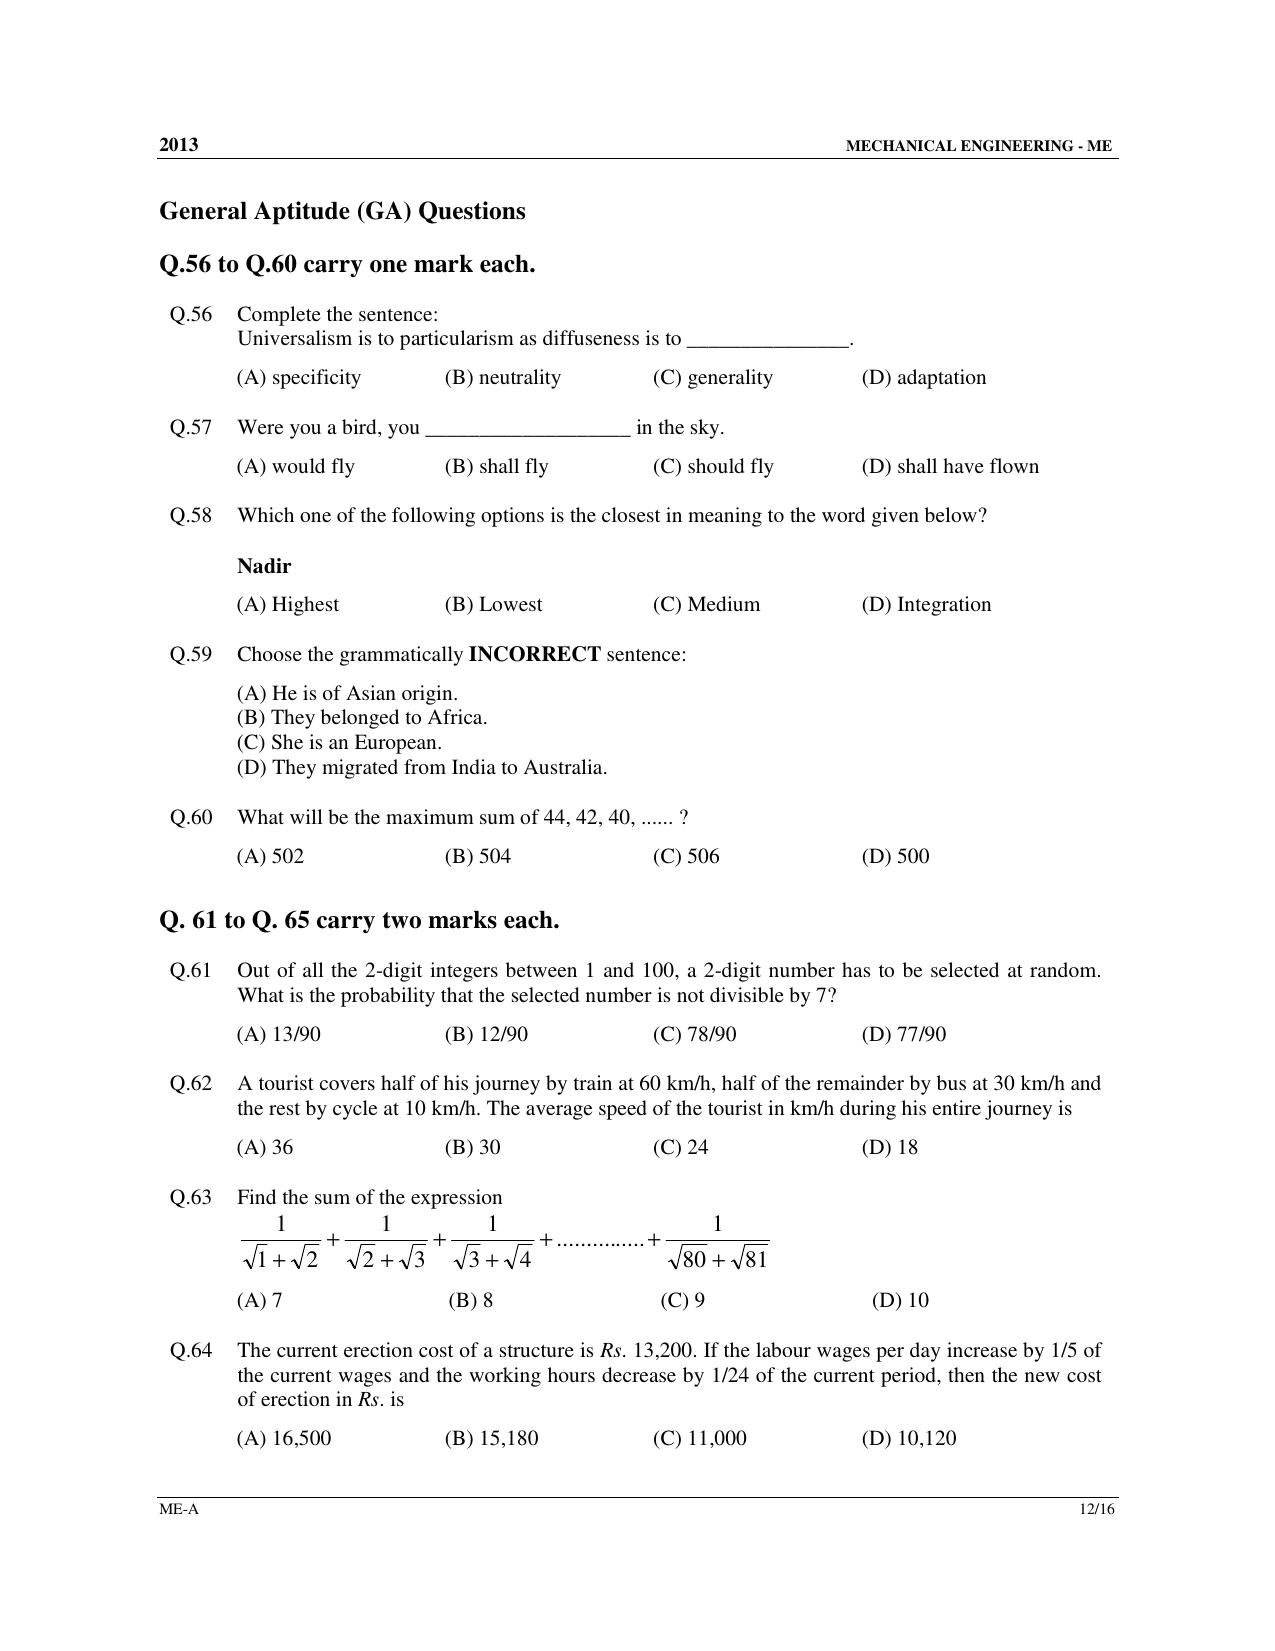 GATE 2013 Mechanical Engineering (ME) Question Paper with Answer Key - Page 13